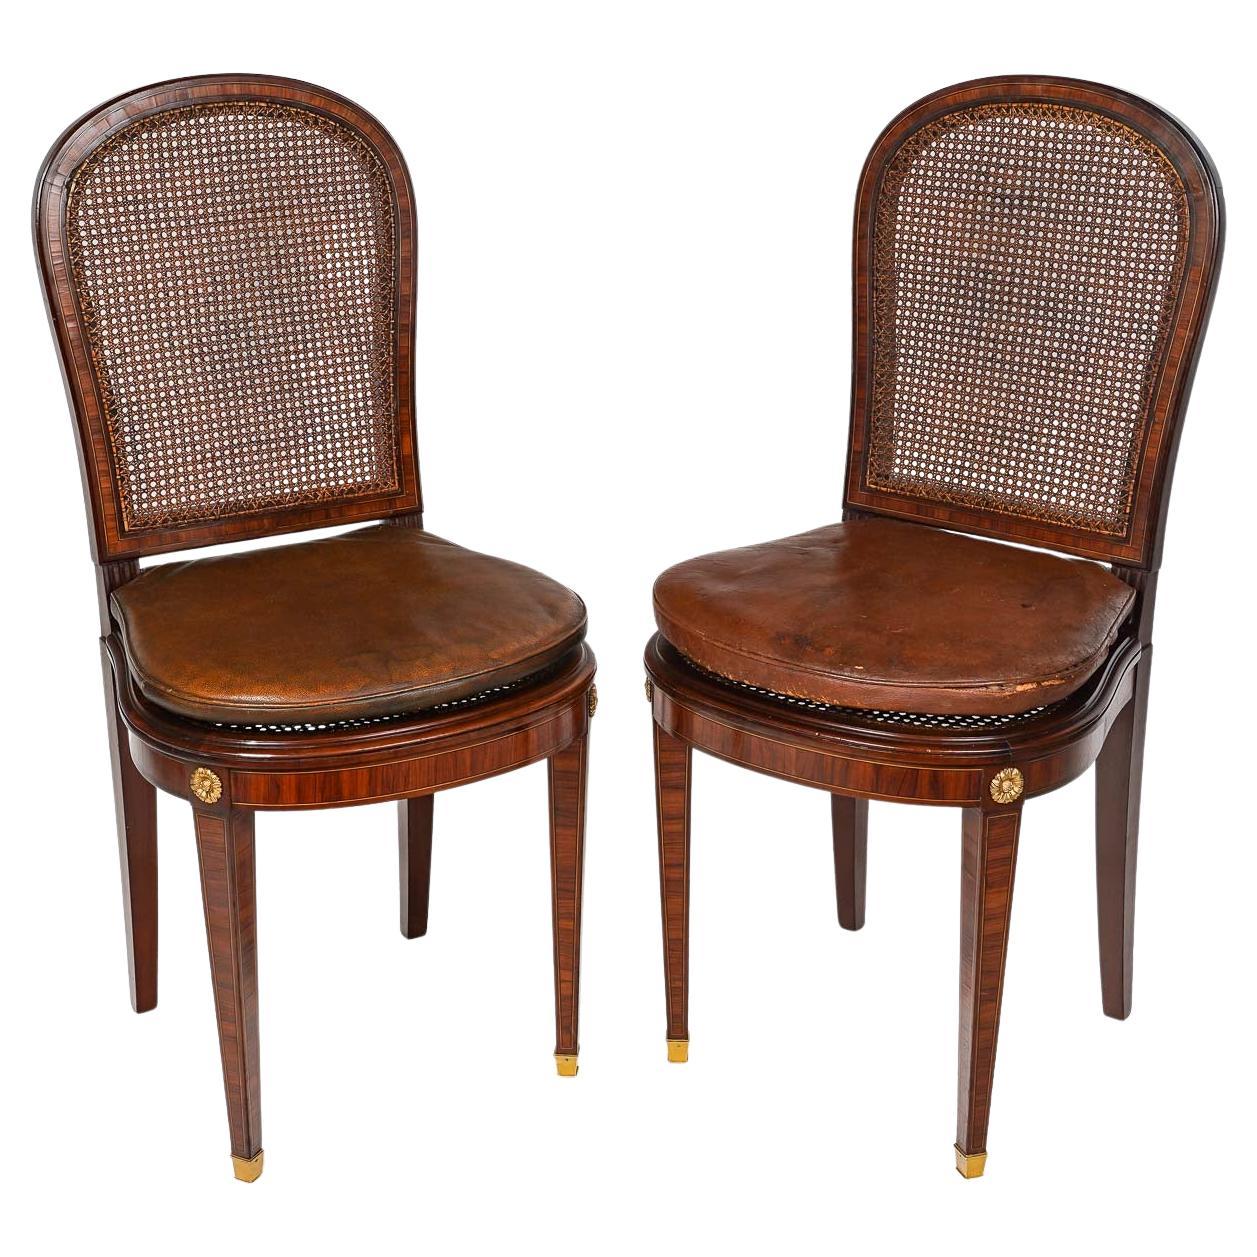 Pair of 19th Century Chairs in the Louis XVI Style